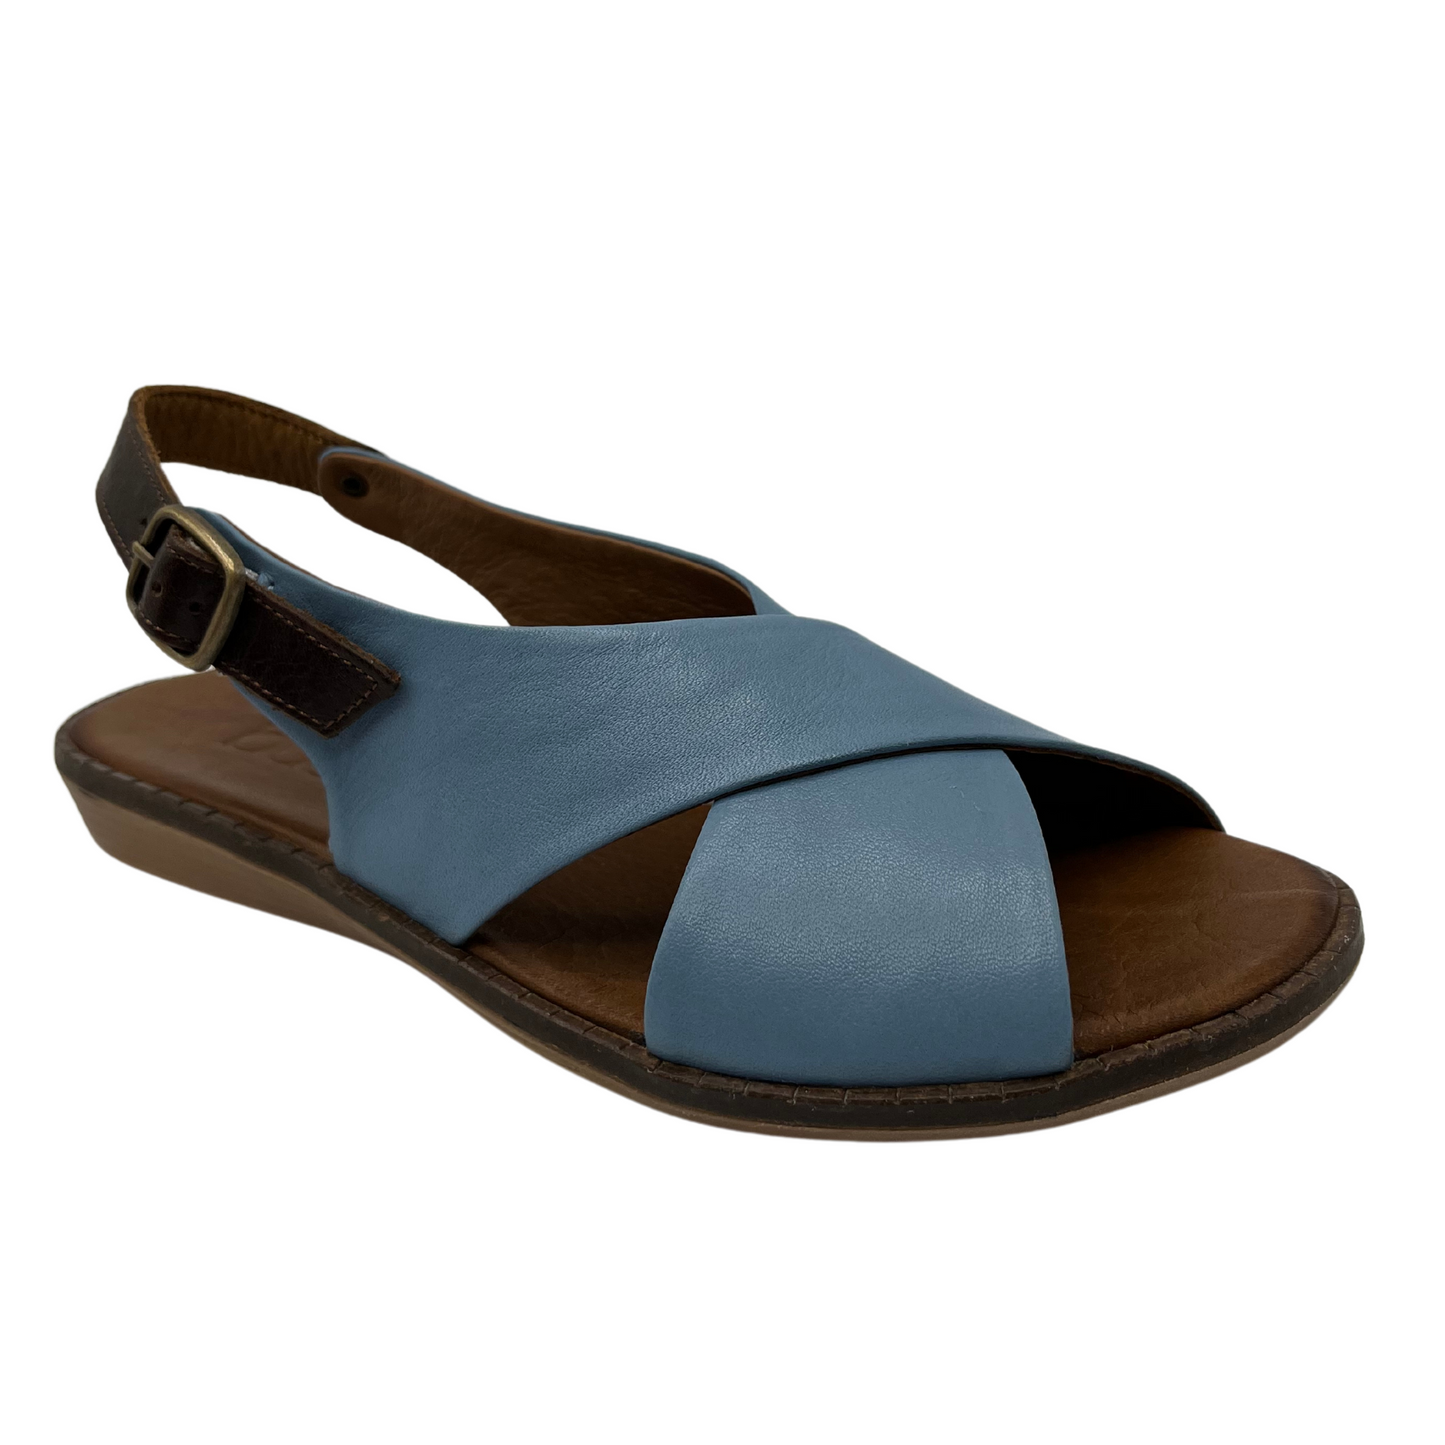 45 degree angled view of light blue leather sandal with cross strap design, slight wedge heel and brown slingback strap